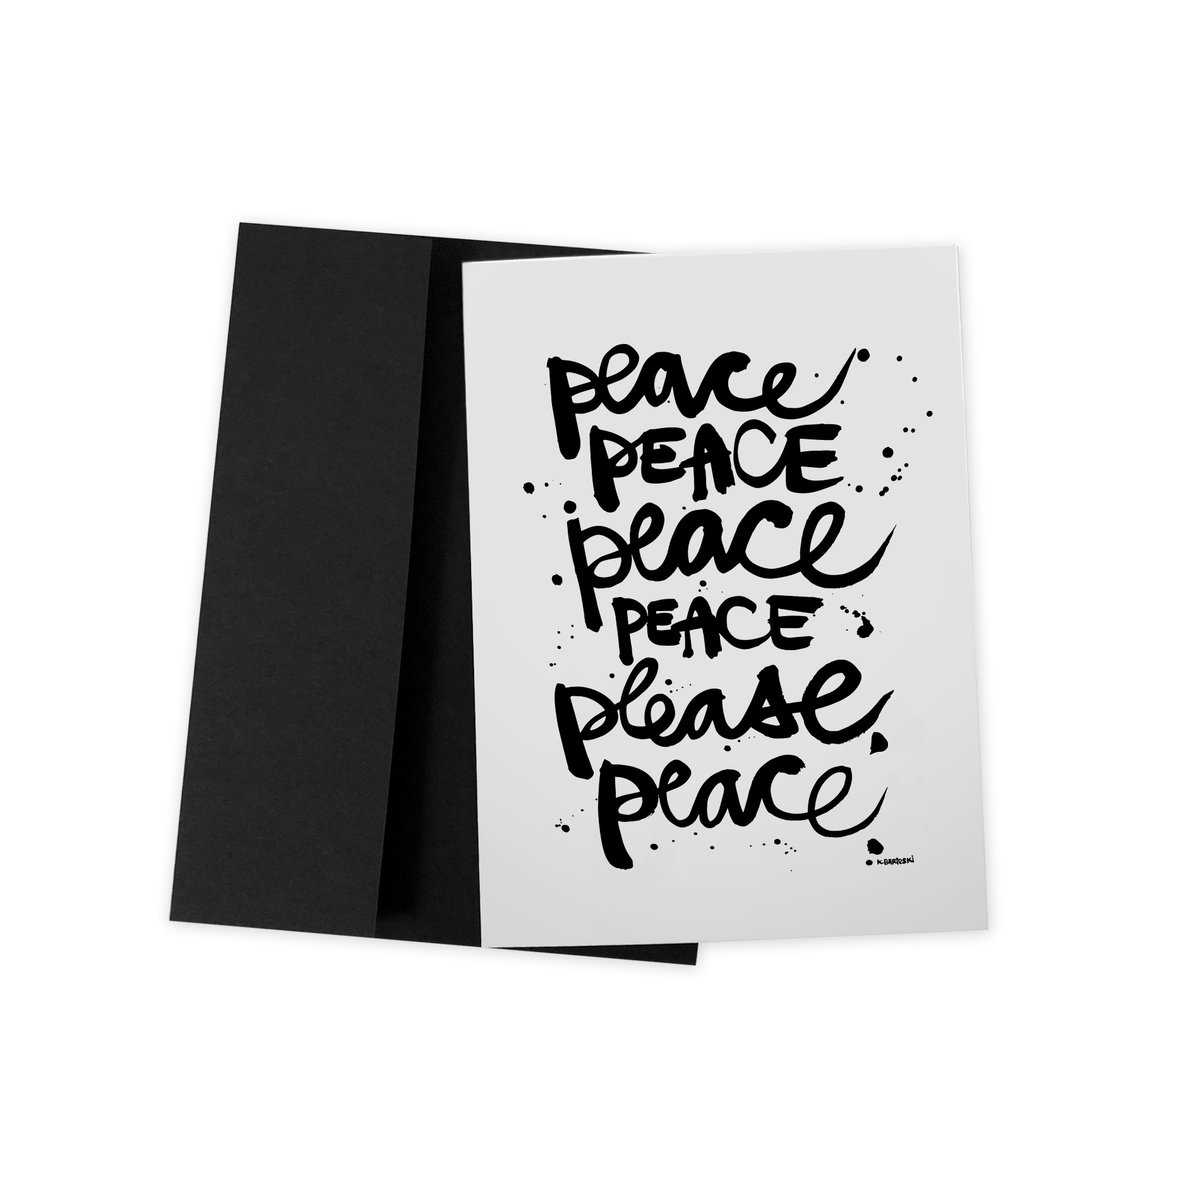 Image of PLEASE PEACE #kbscript greeting card